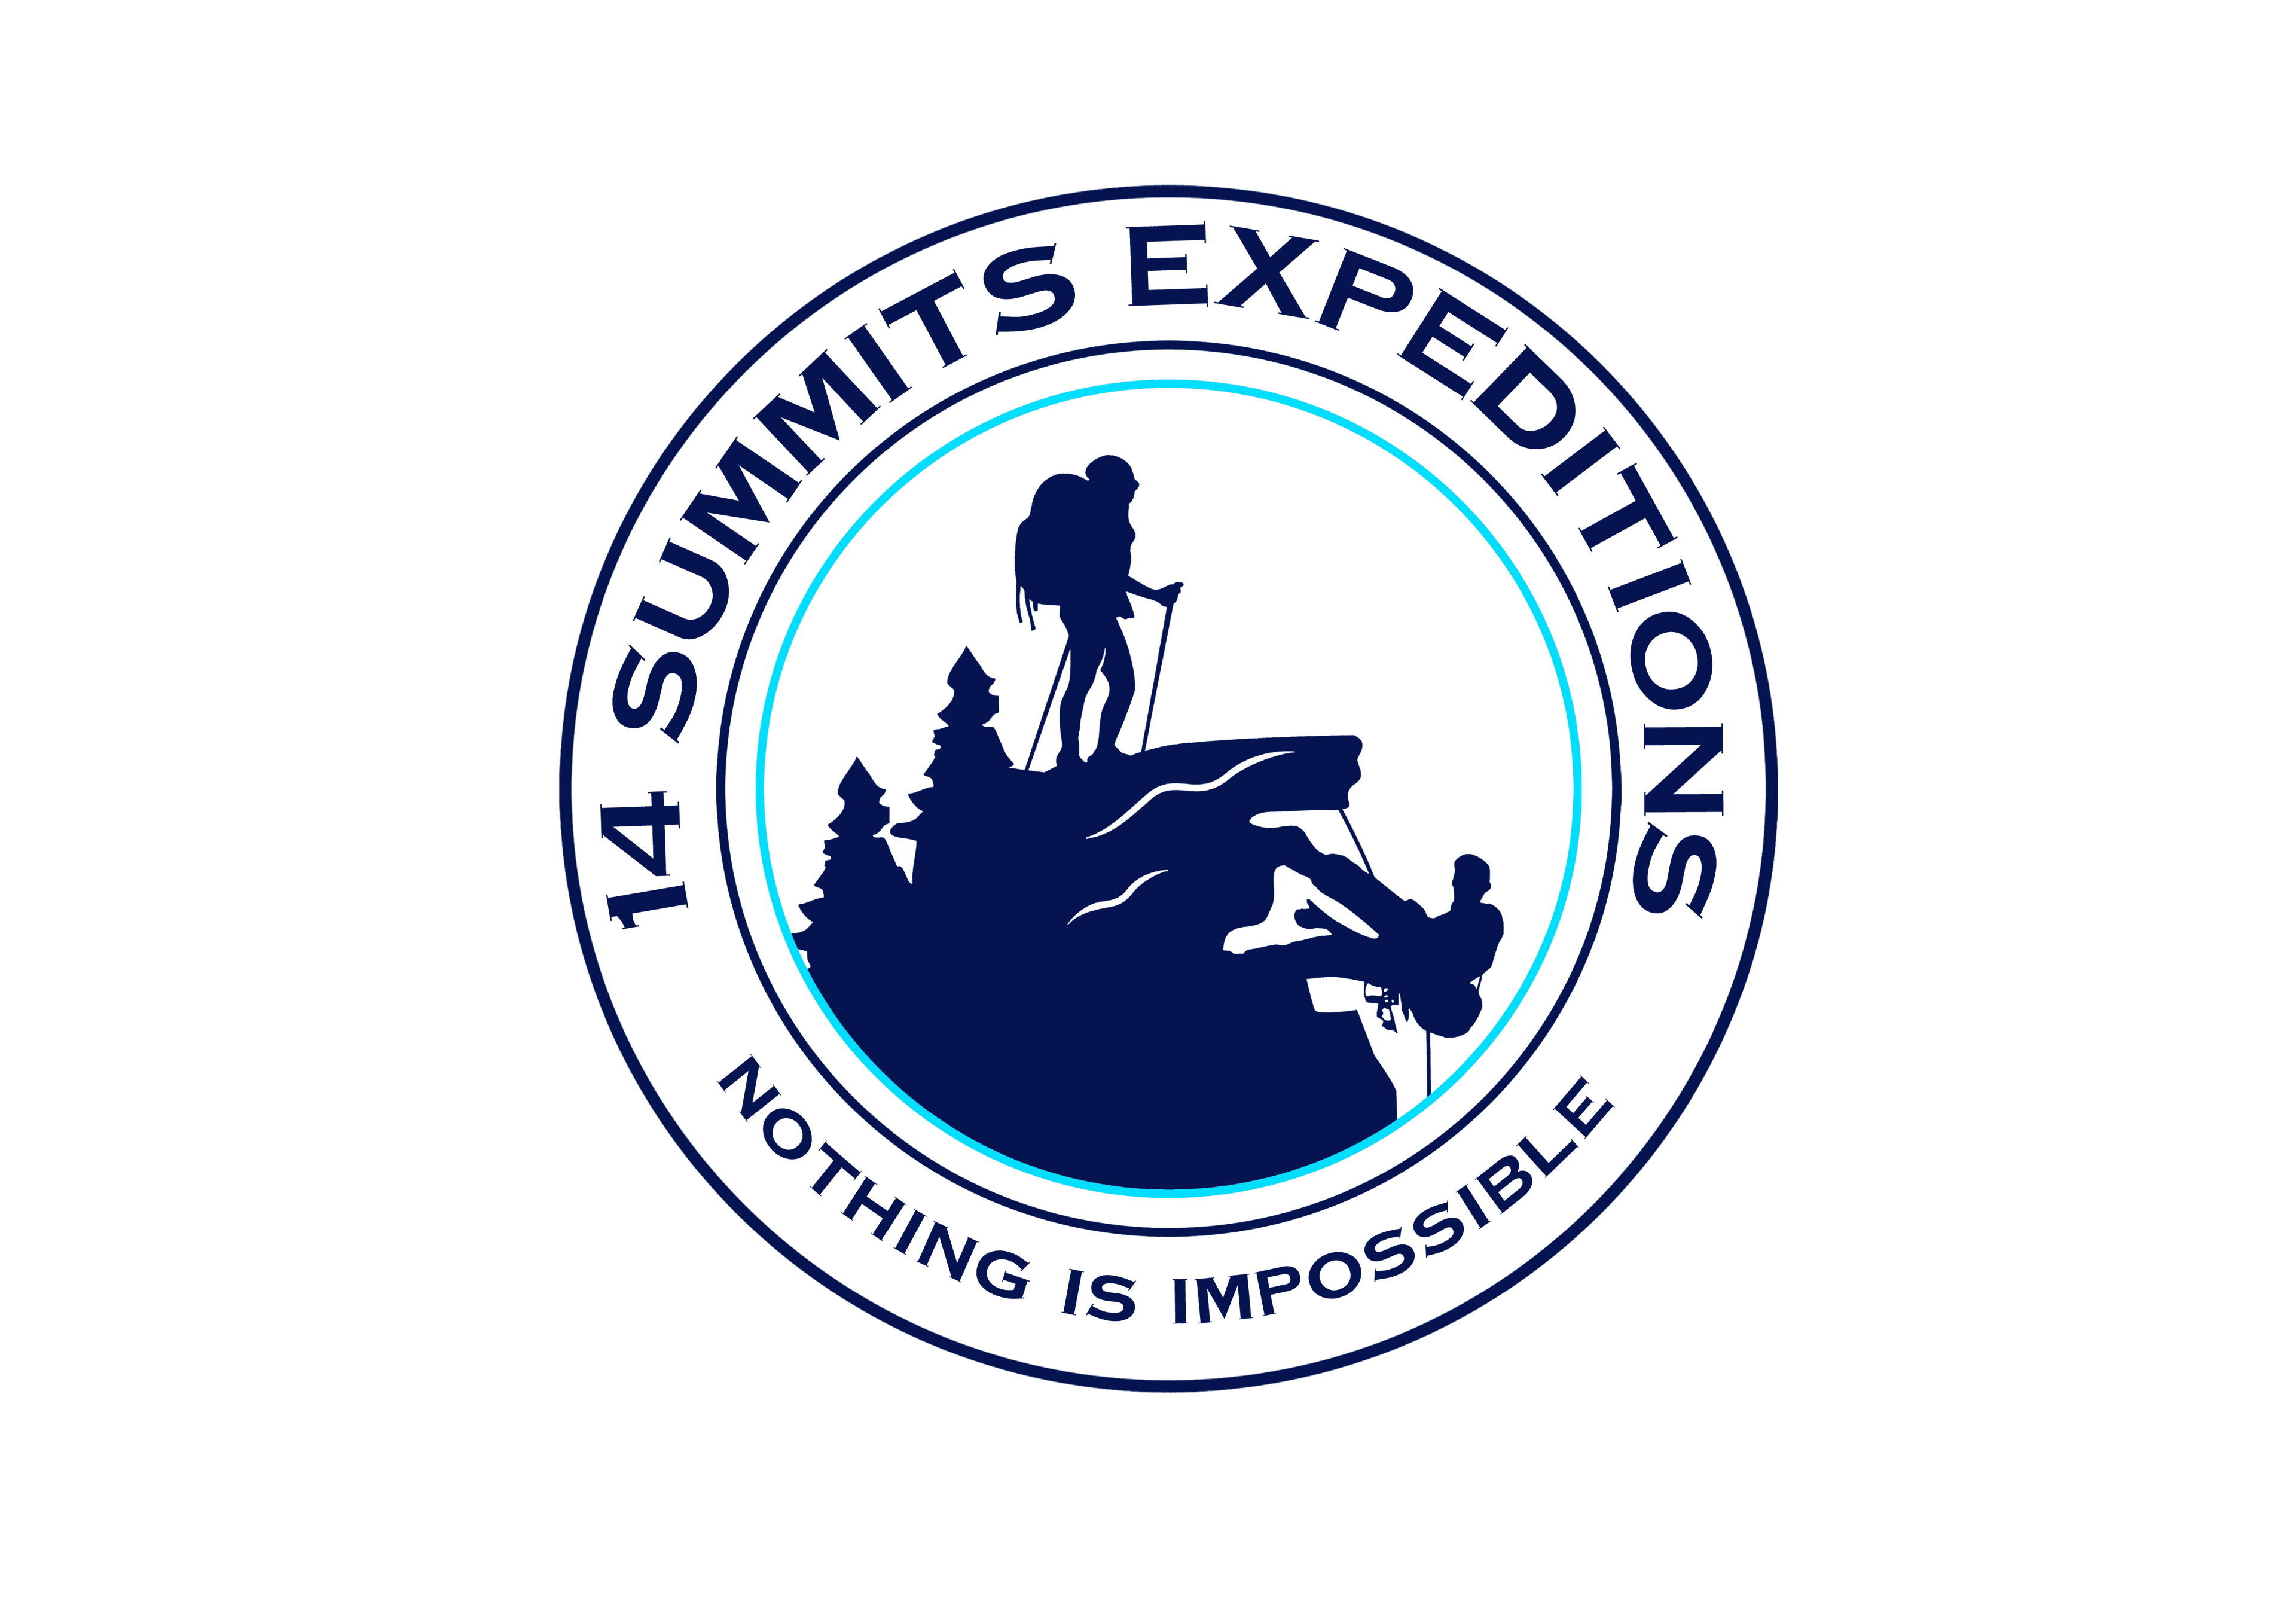 14 Summits Expeditions 